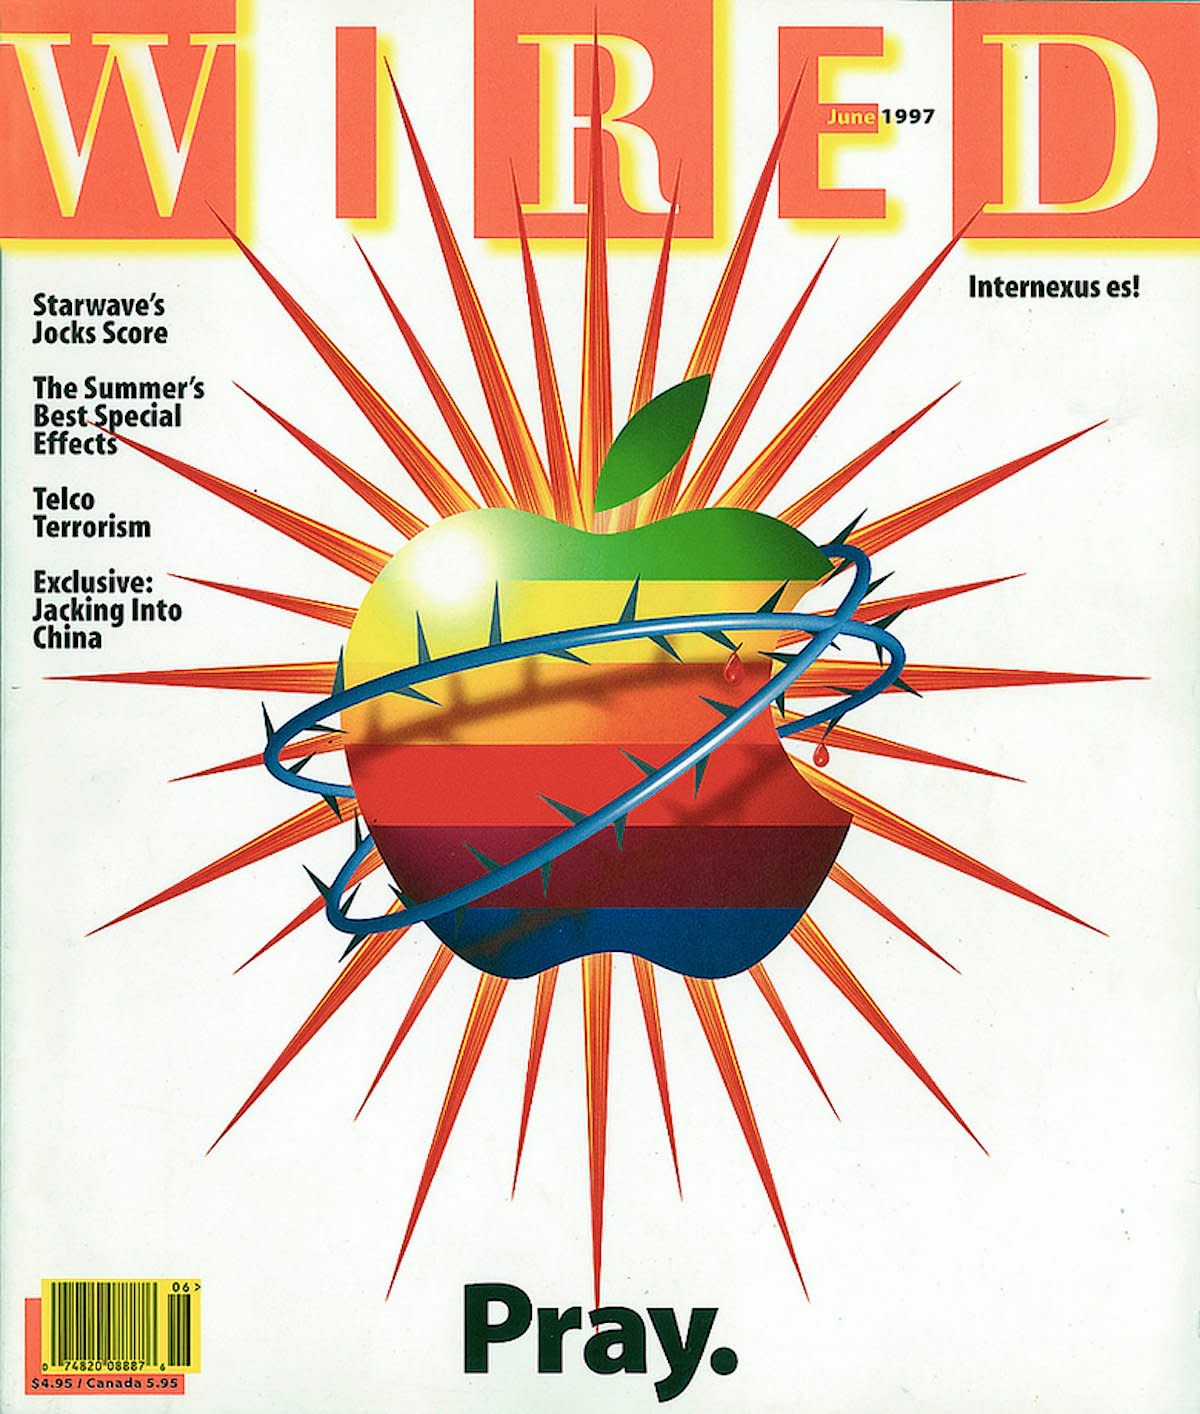 All the things Wired got hilariously wrong in its legendary 1997